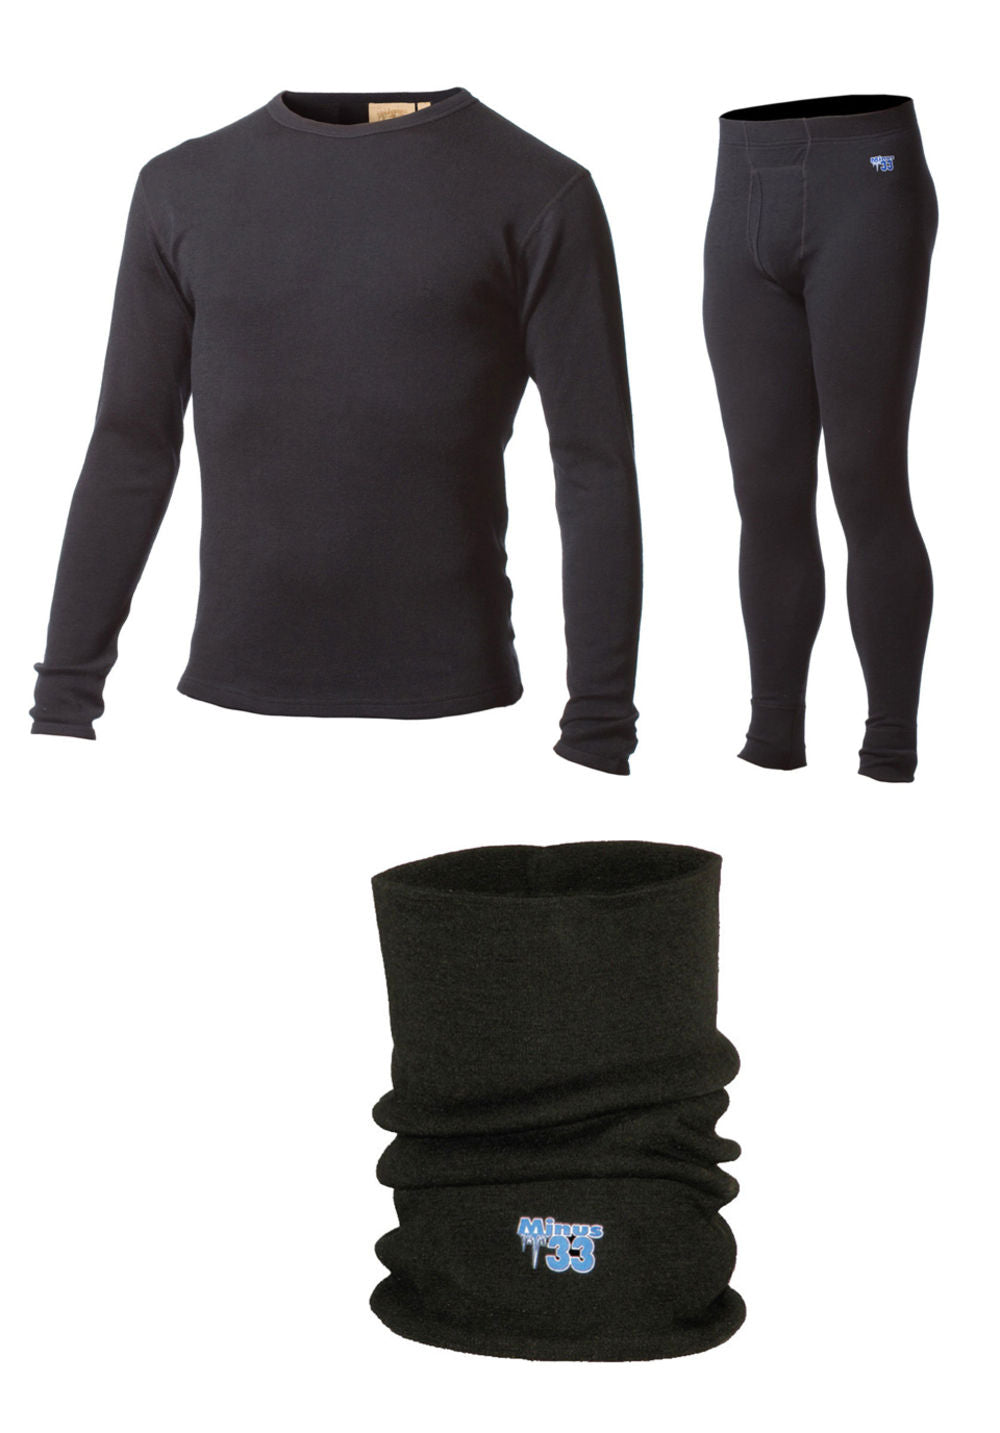 minus33 merino wool clothing, product review on arctic adventure gear by Field and stream.